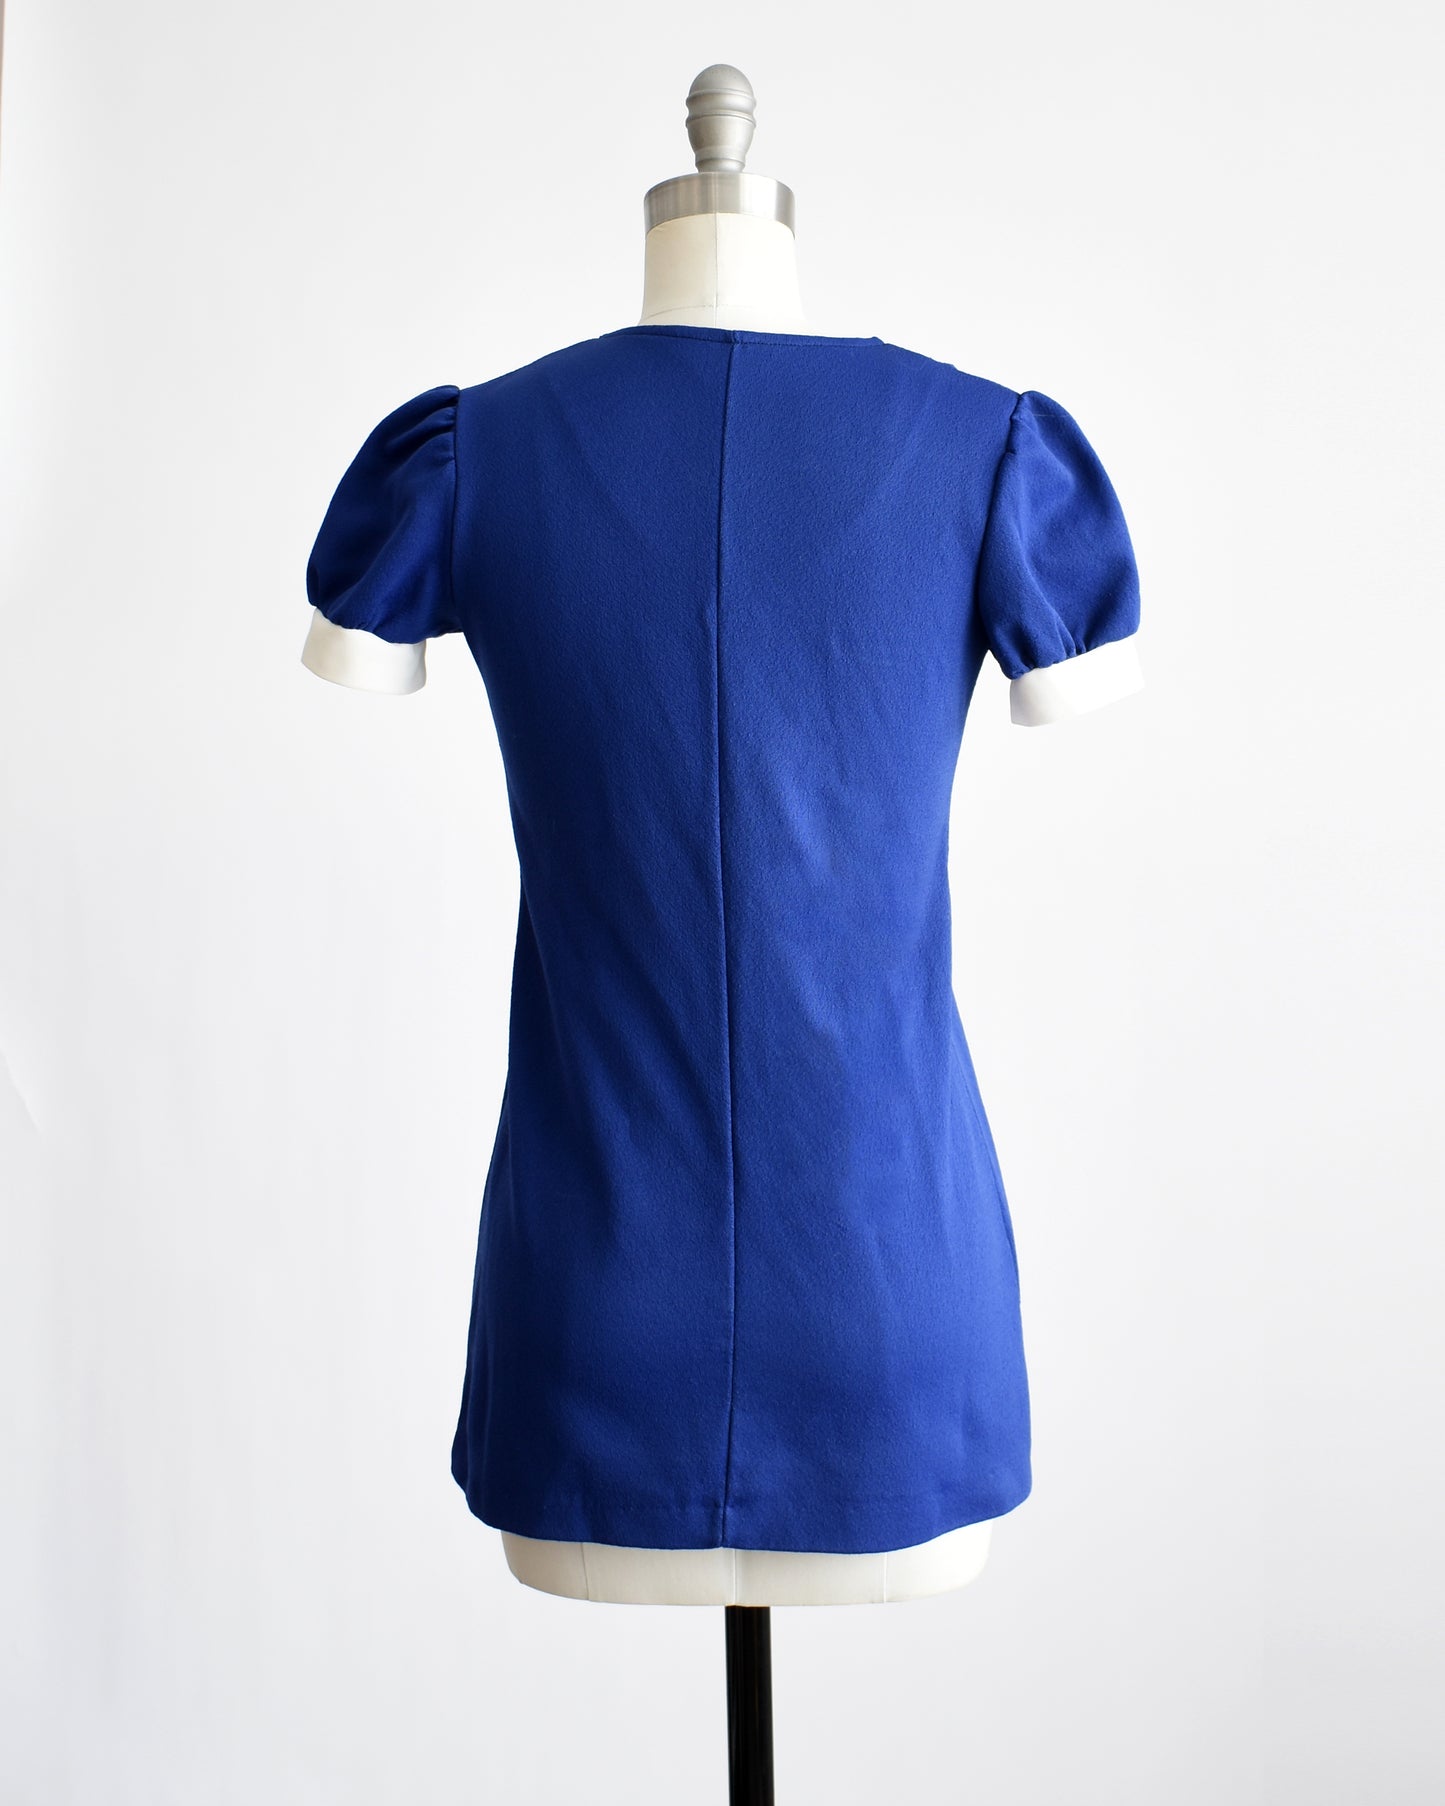 back view of a vintage late 1960s early 1970s dark blue top 